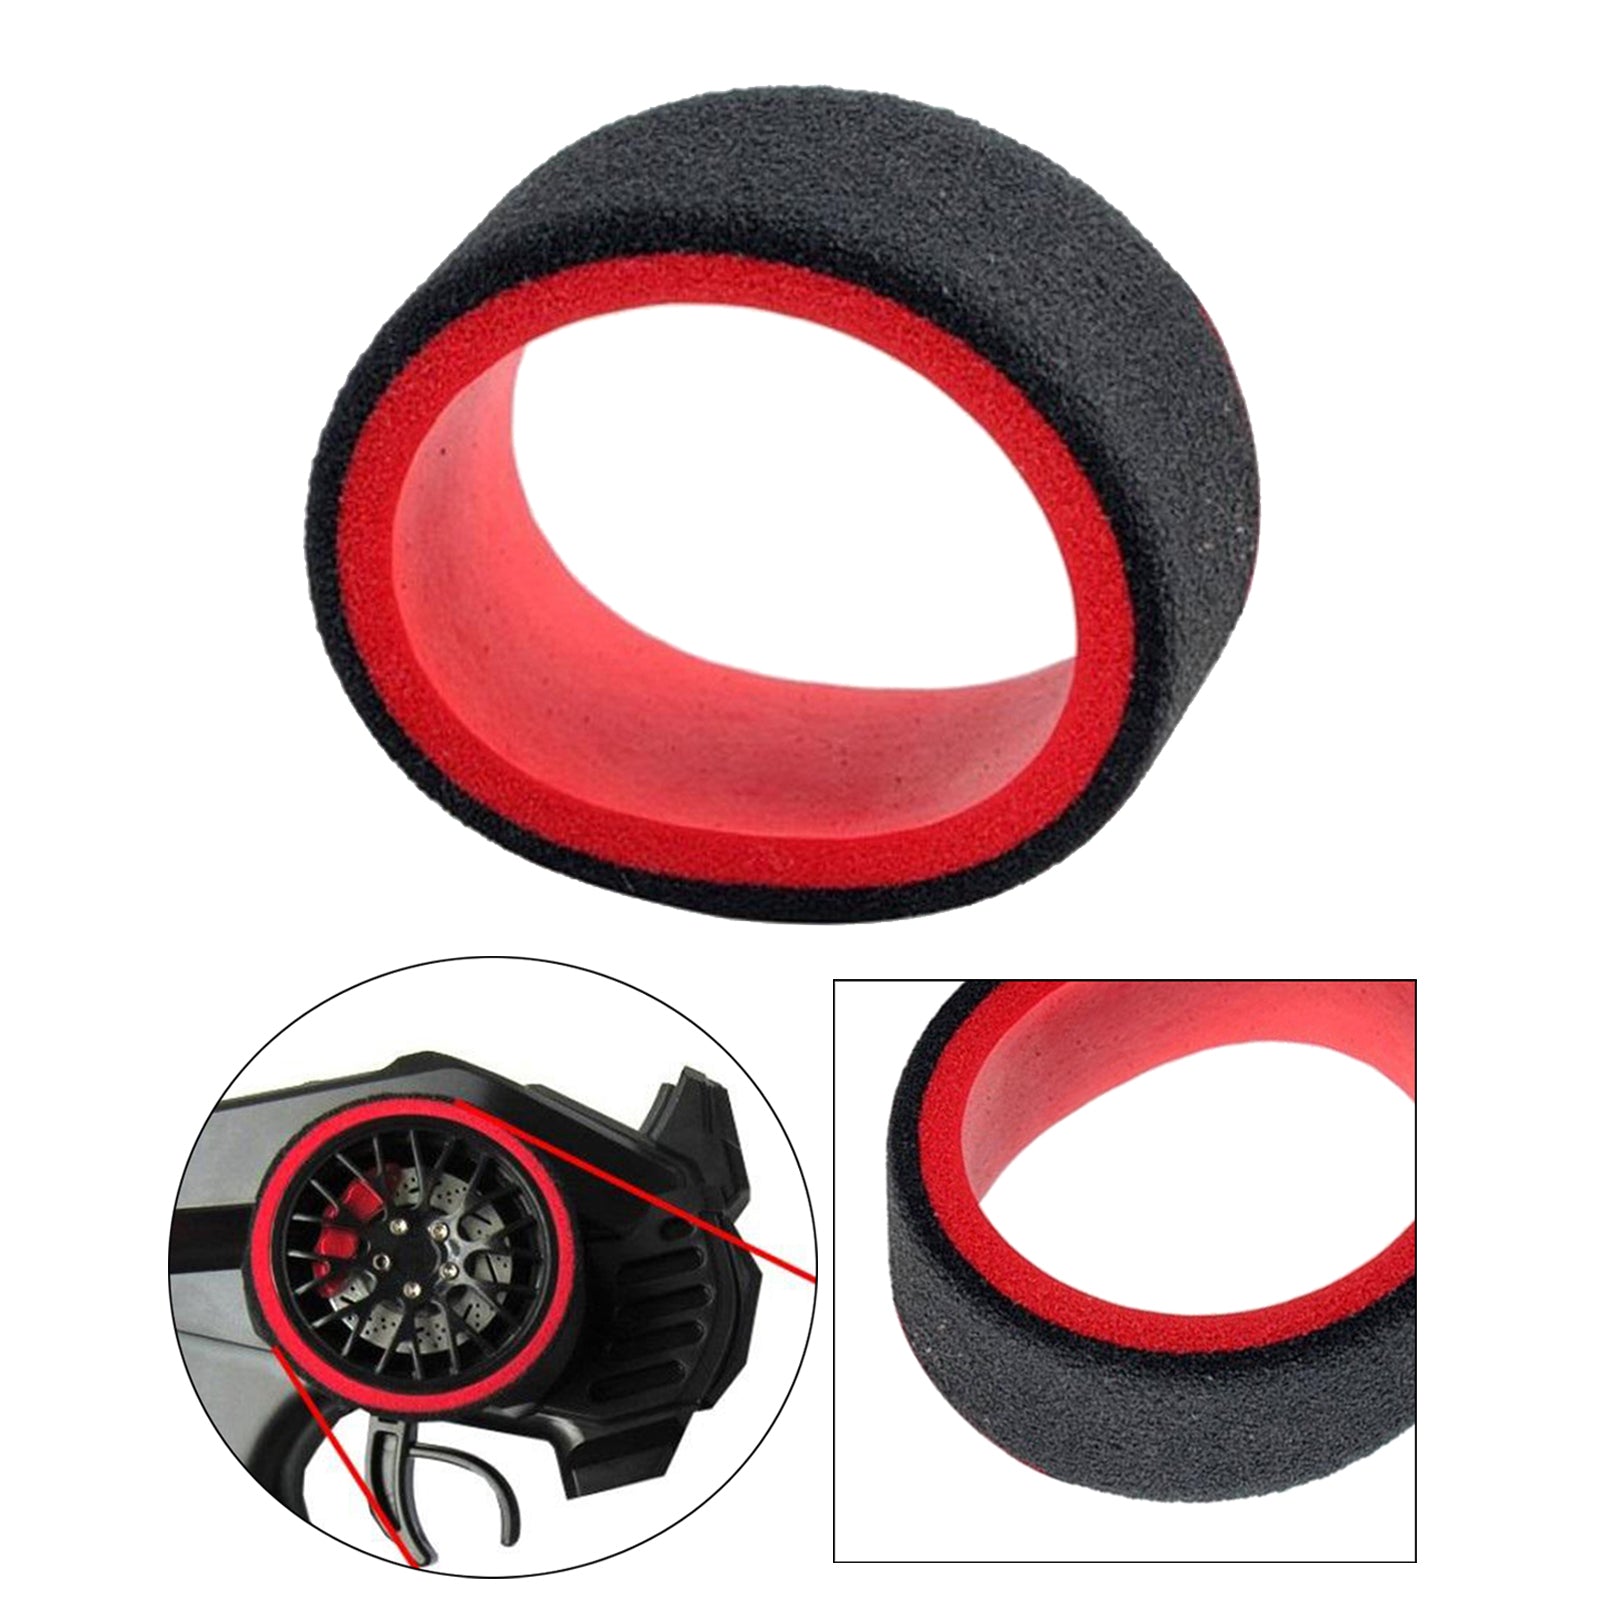 ProtonRC Universal RC Transmitter Double Color Steering Wheel Sponge Grip for Remote Control